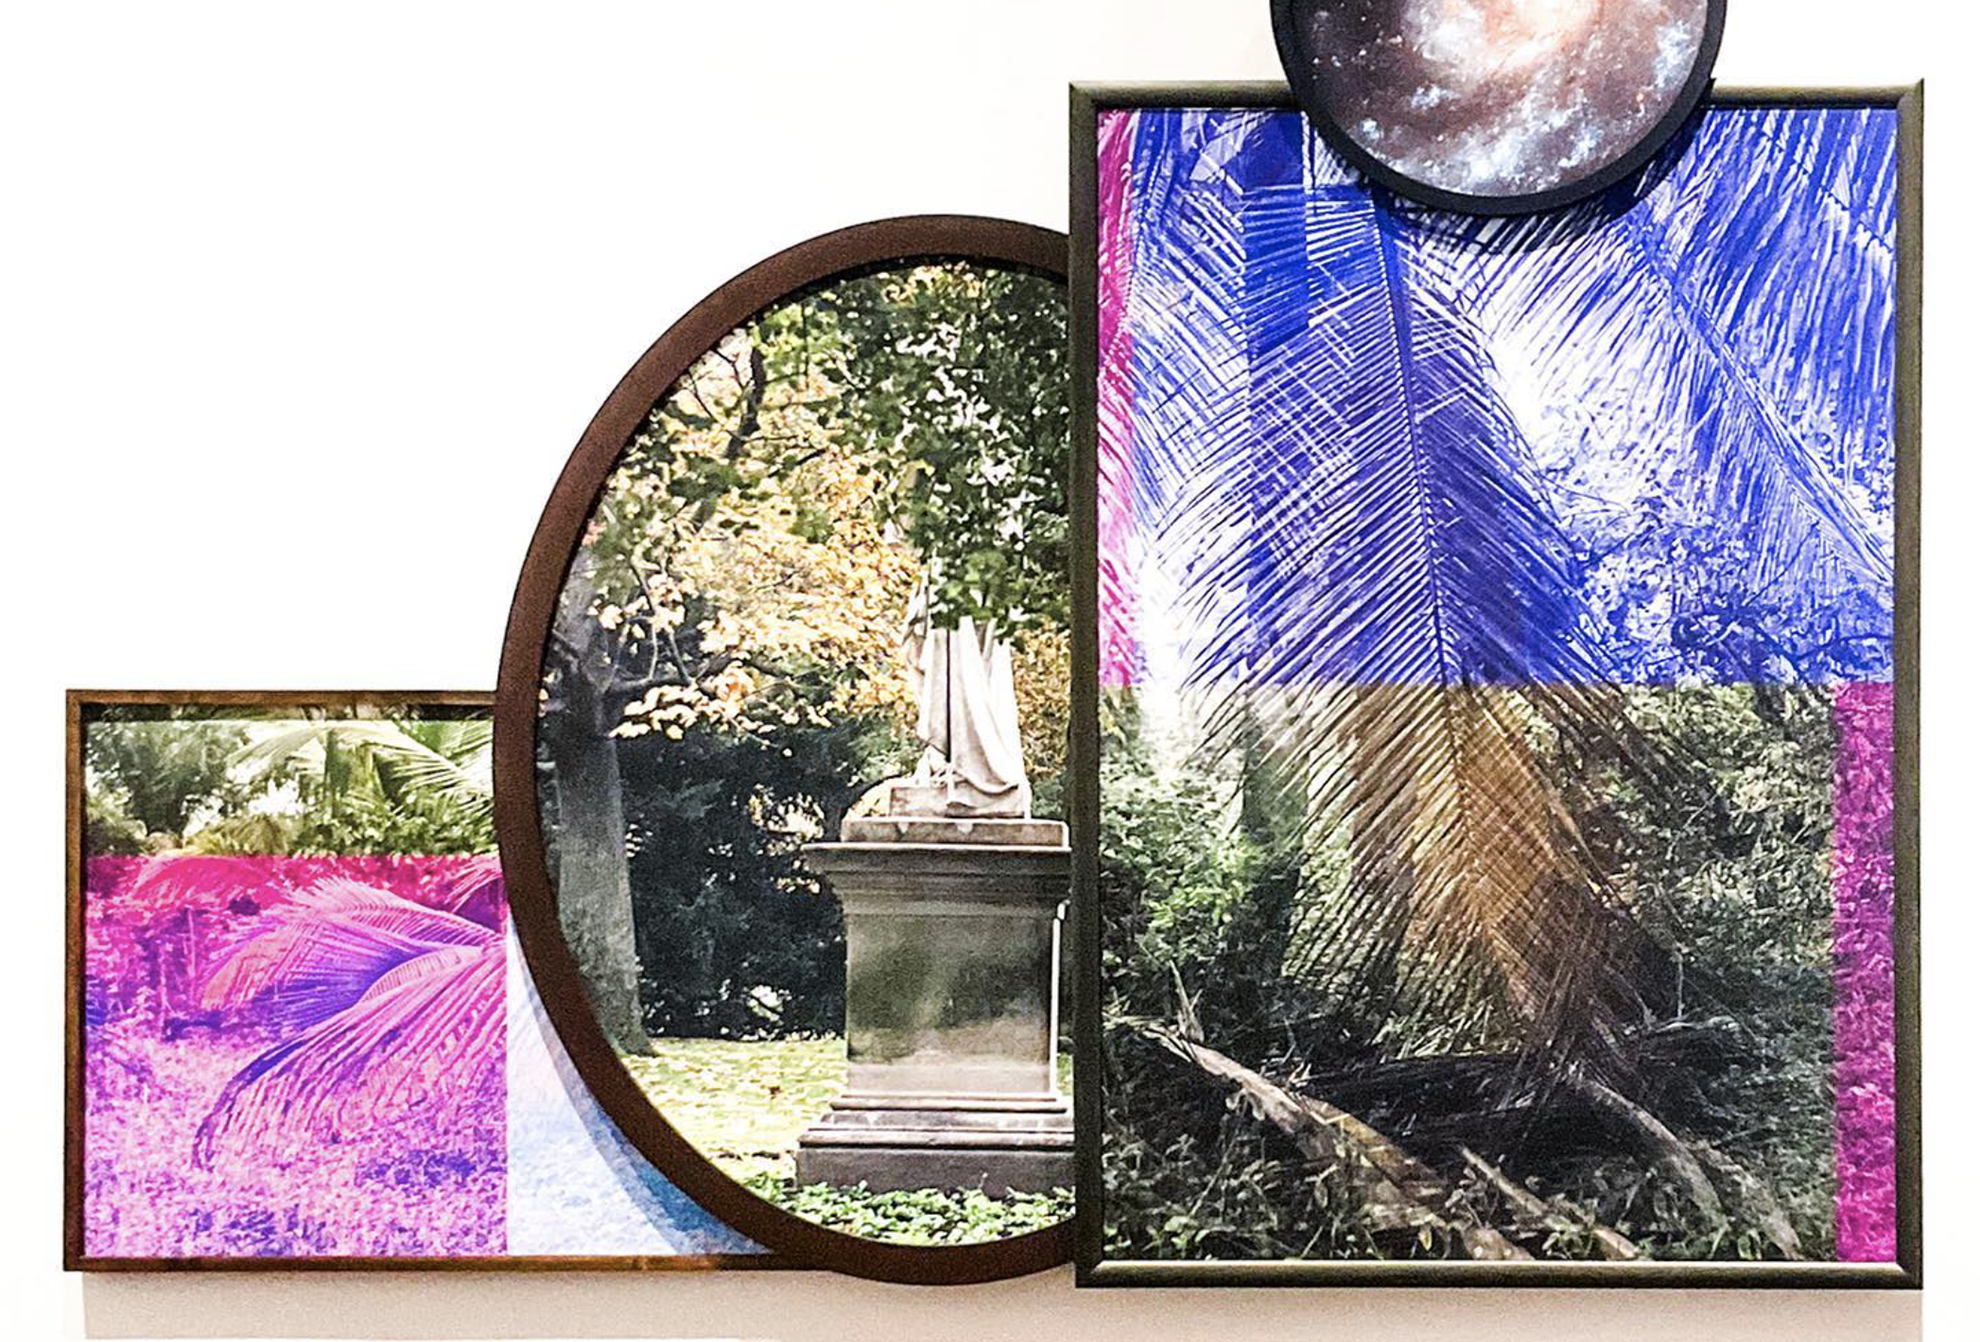 Todd Gray (b. 1954), “Euclidean Gris Gris (Tropic of Entropy),” 2019, Four archival pigment prints in artists frames and found frames, UV laminate.